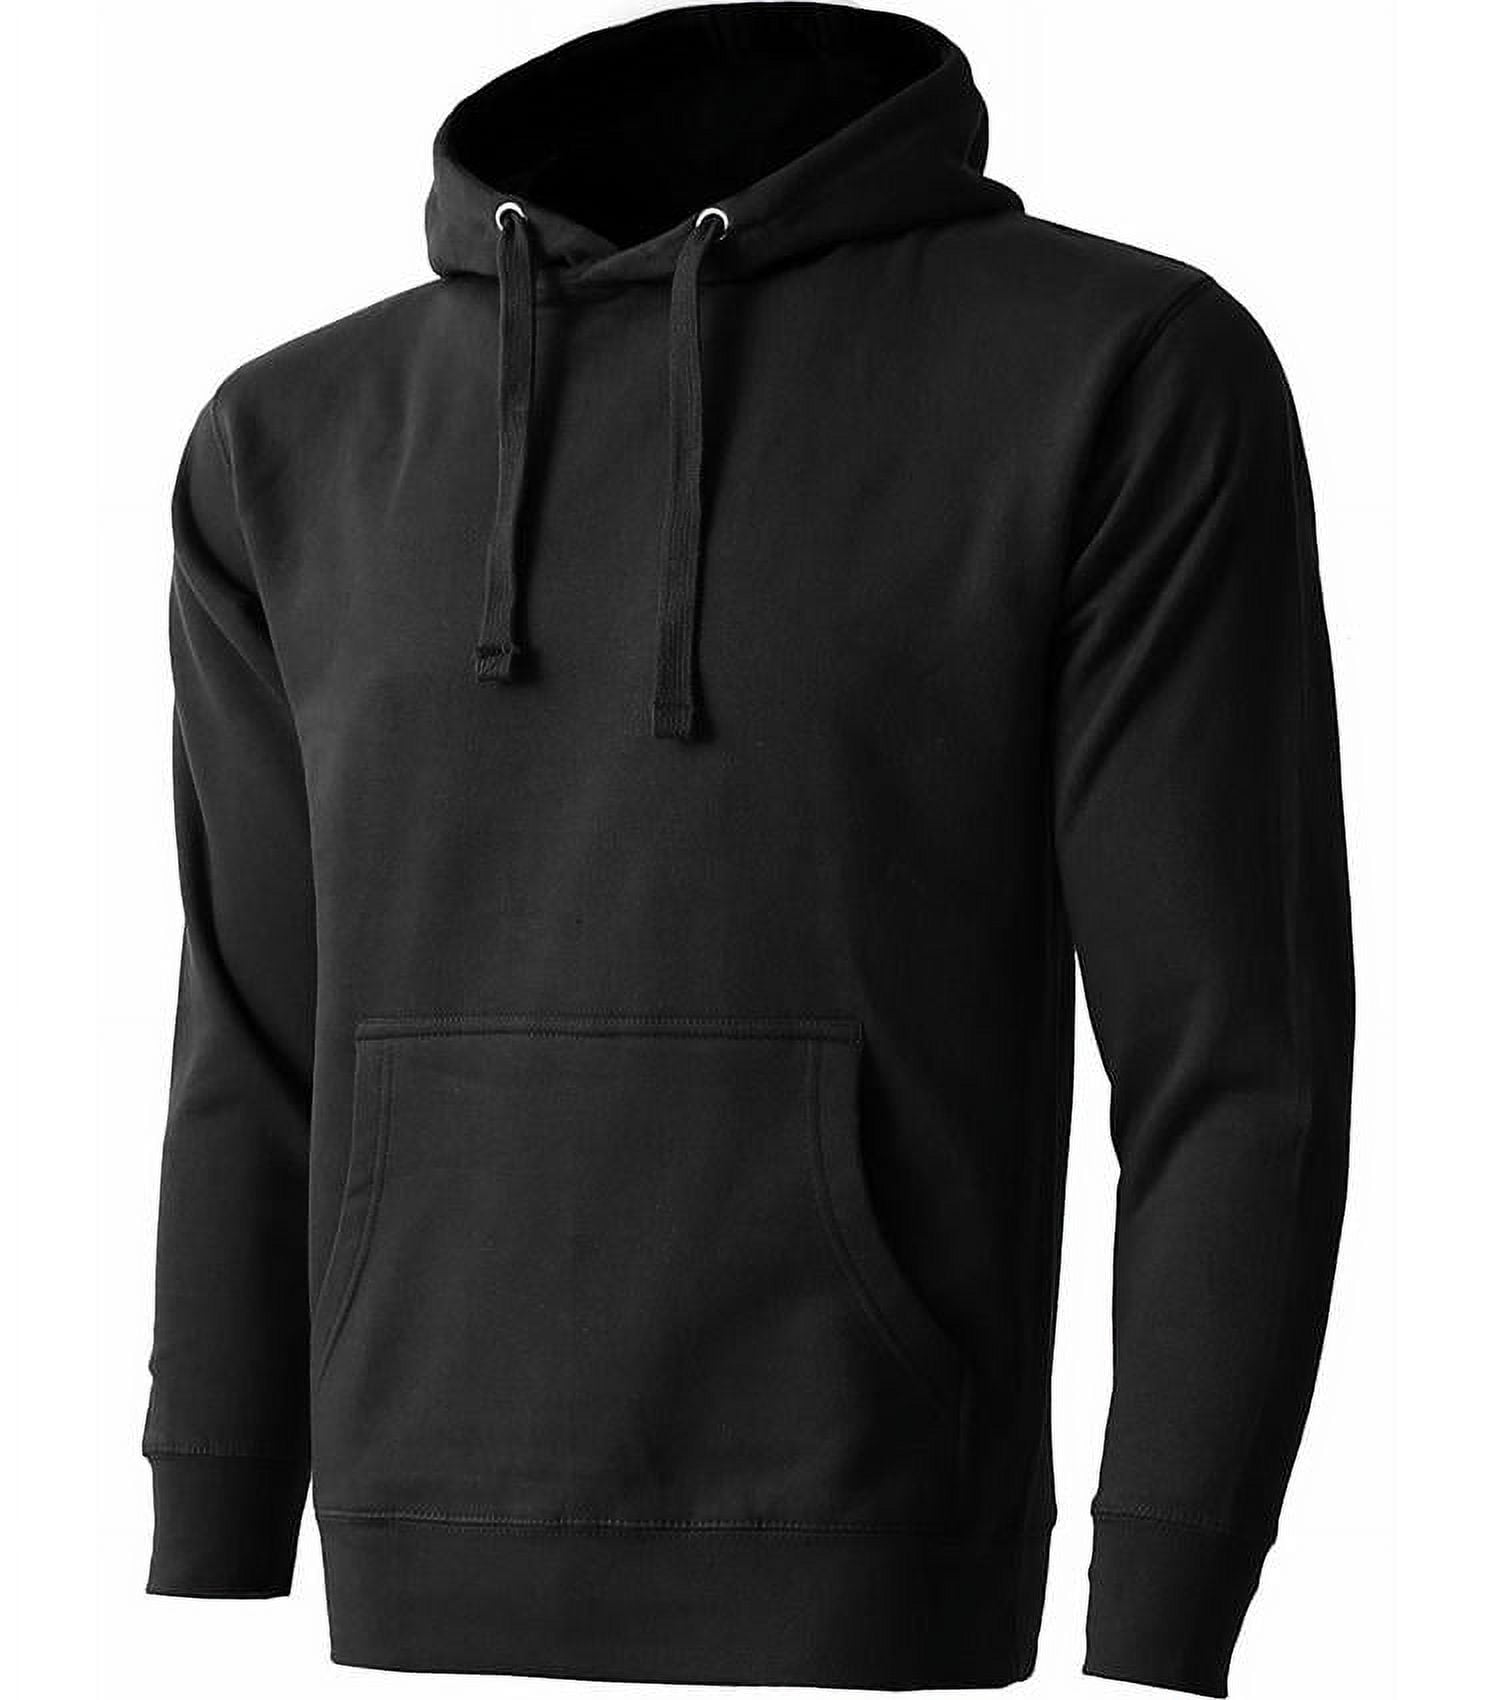 Men's Heavyweight Casual Pullover Hoodie Sweatshirt with Front